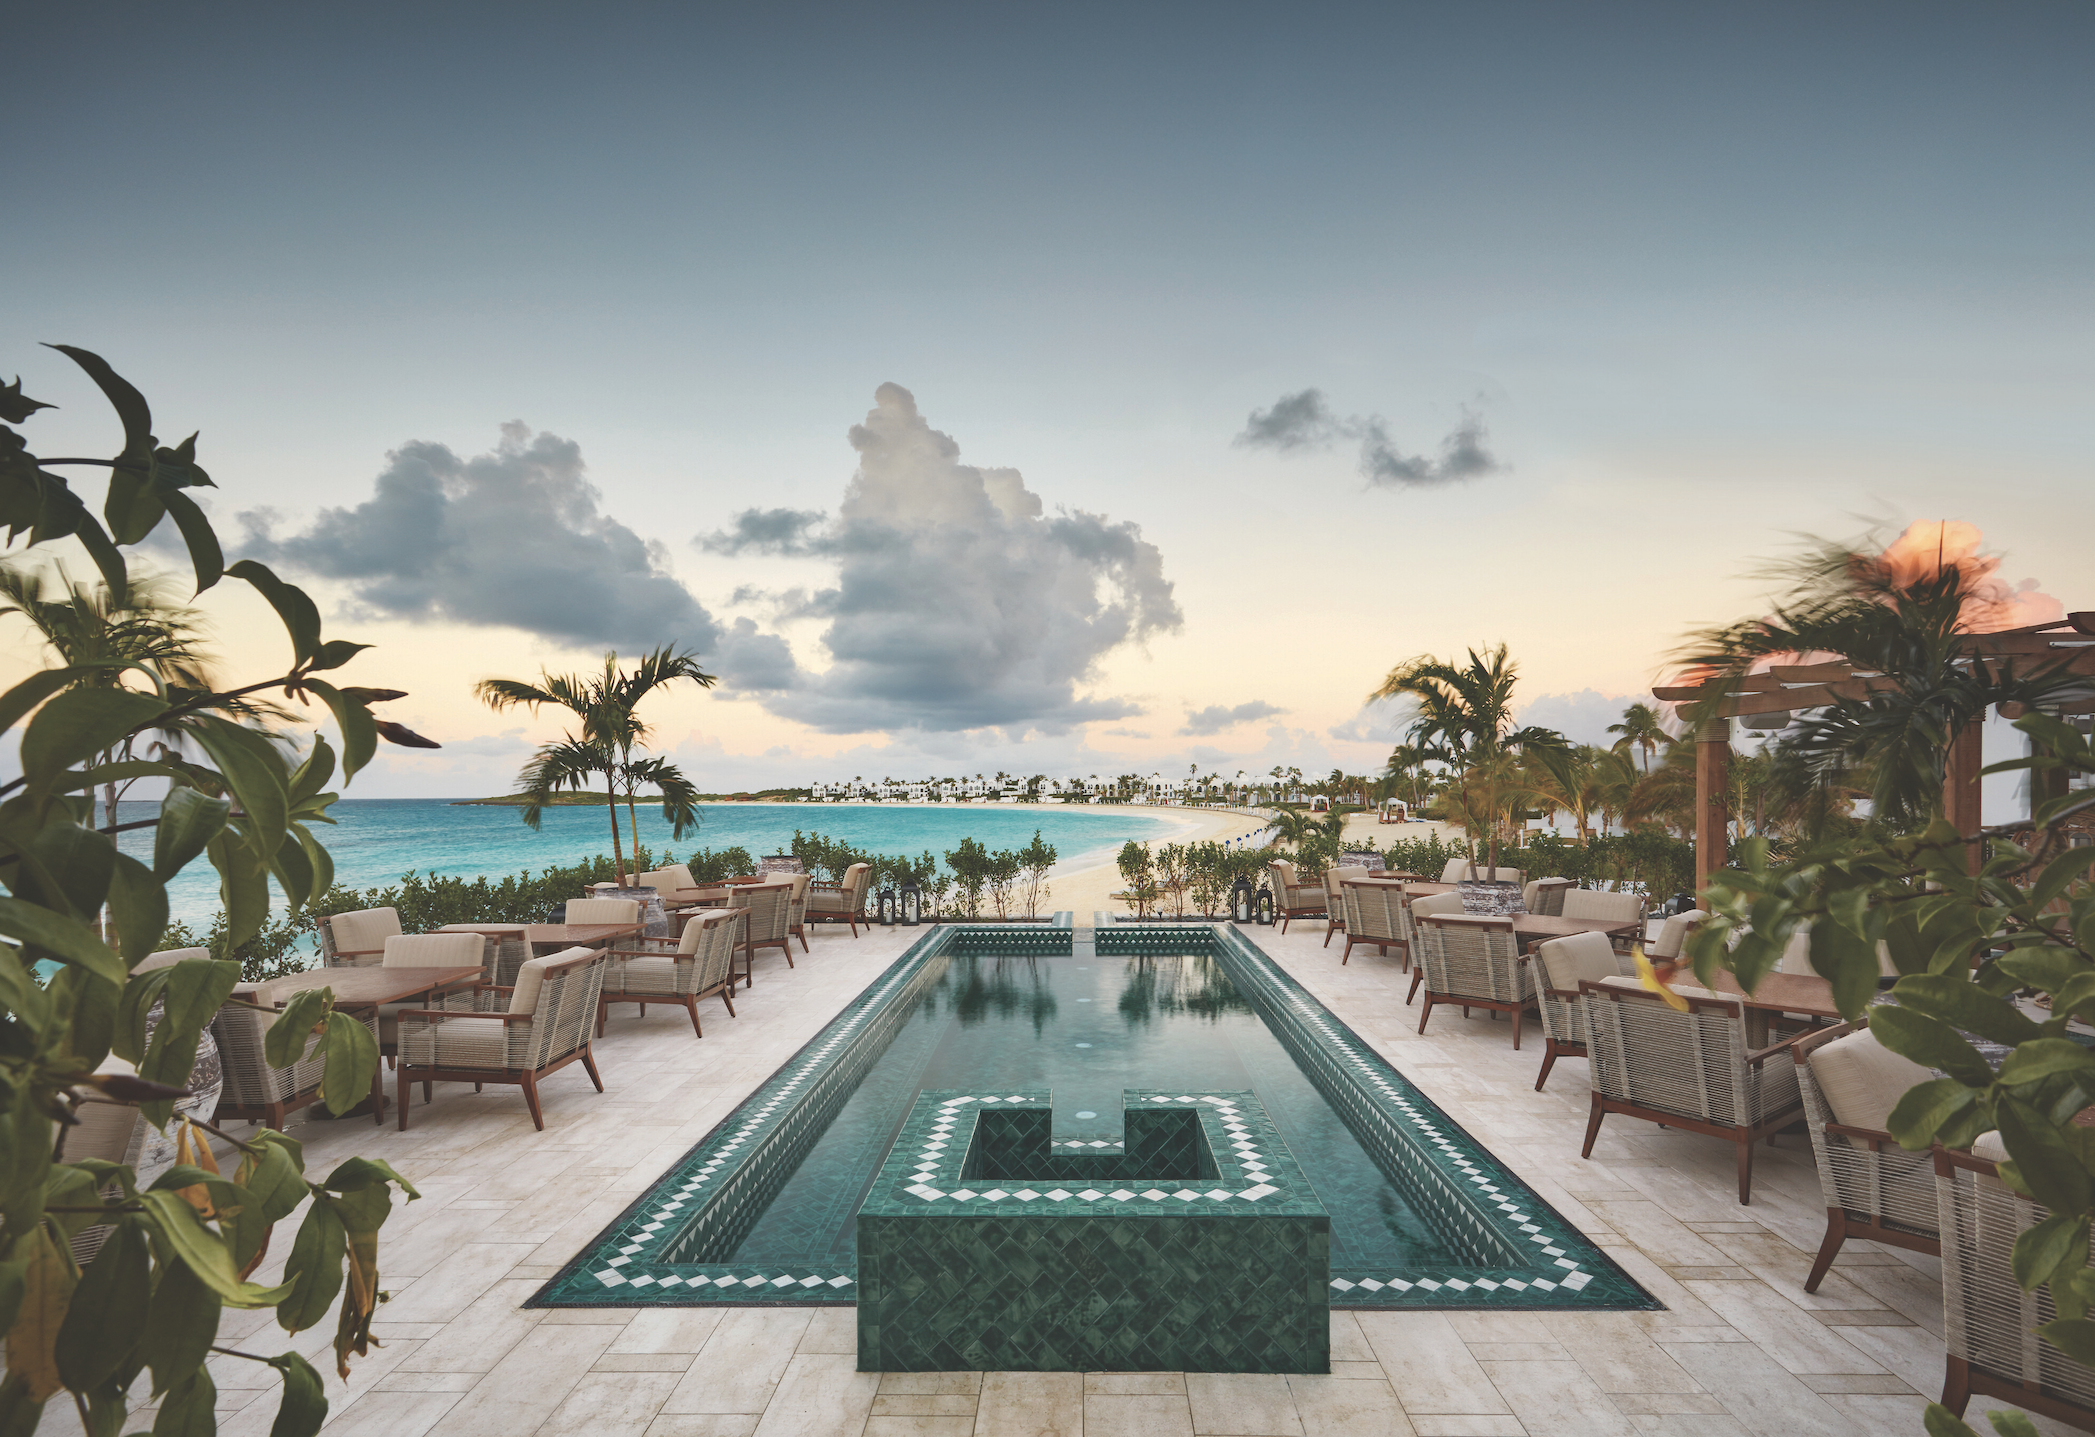 Infinity pool and beach views at Cap Juluca, a Belmond Hotel in Anguilla